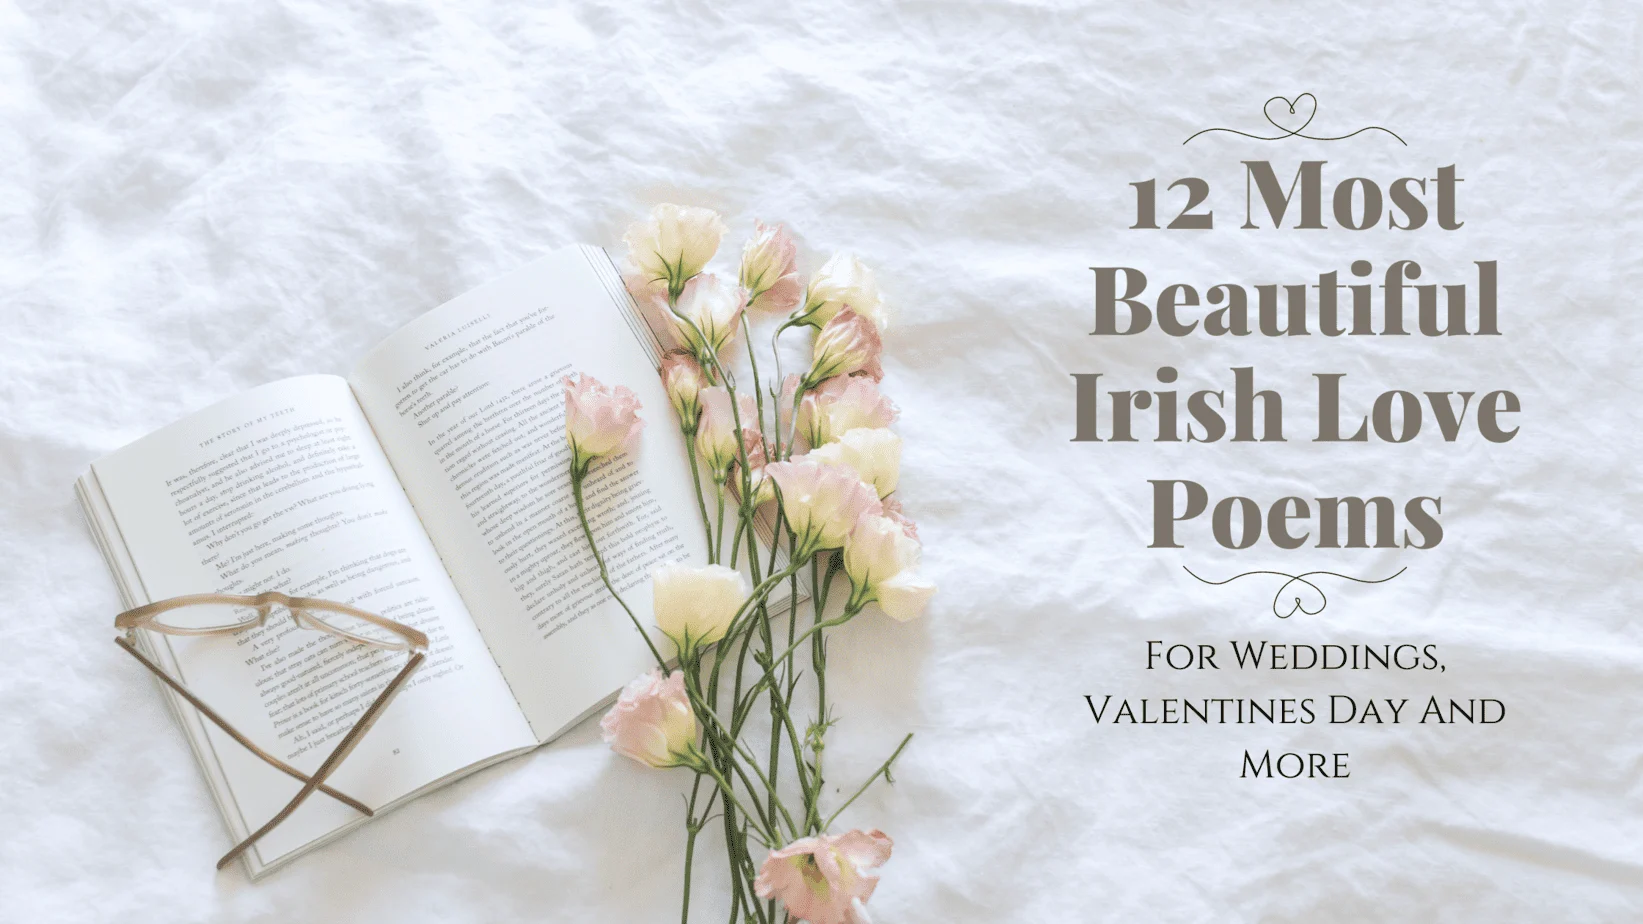 12 Most Beautiful Irish Love Poems For Weddings, Valentine'S Day And More